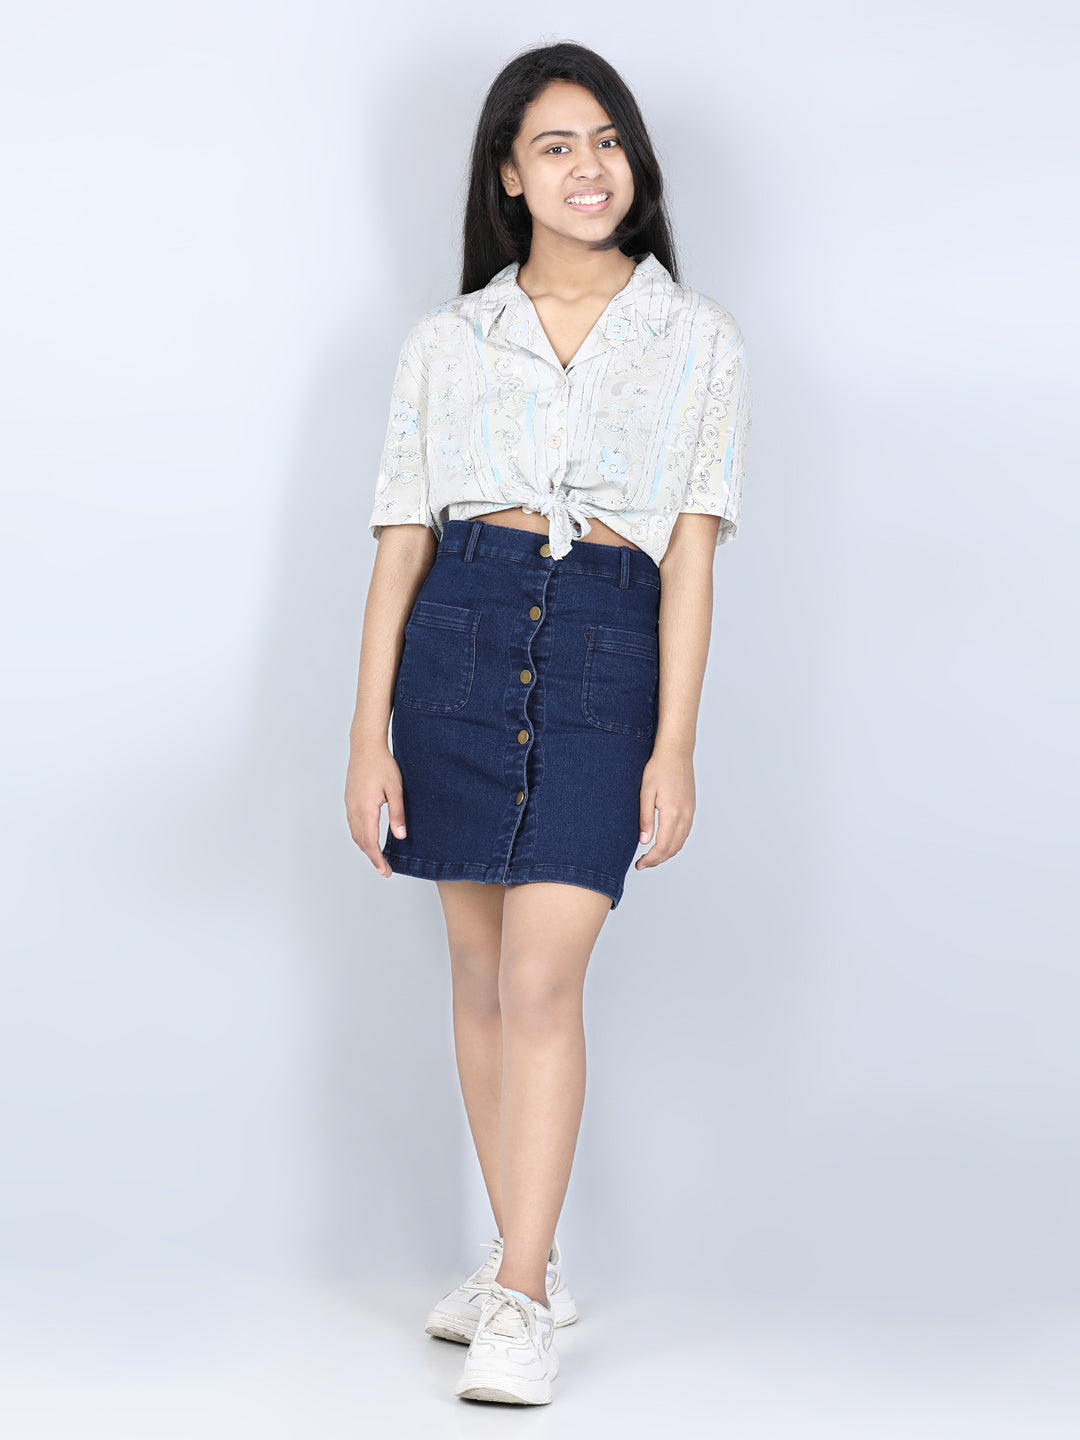 Girls Denim Skirt with front Buttons